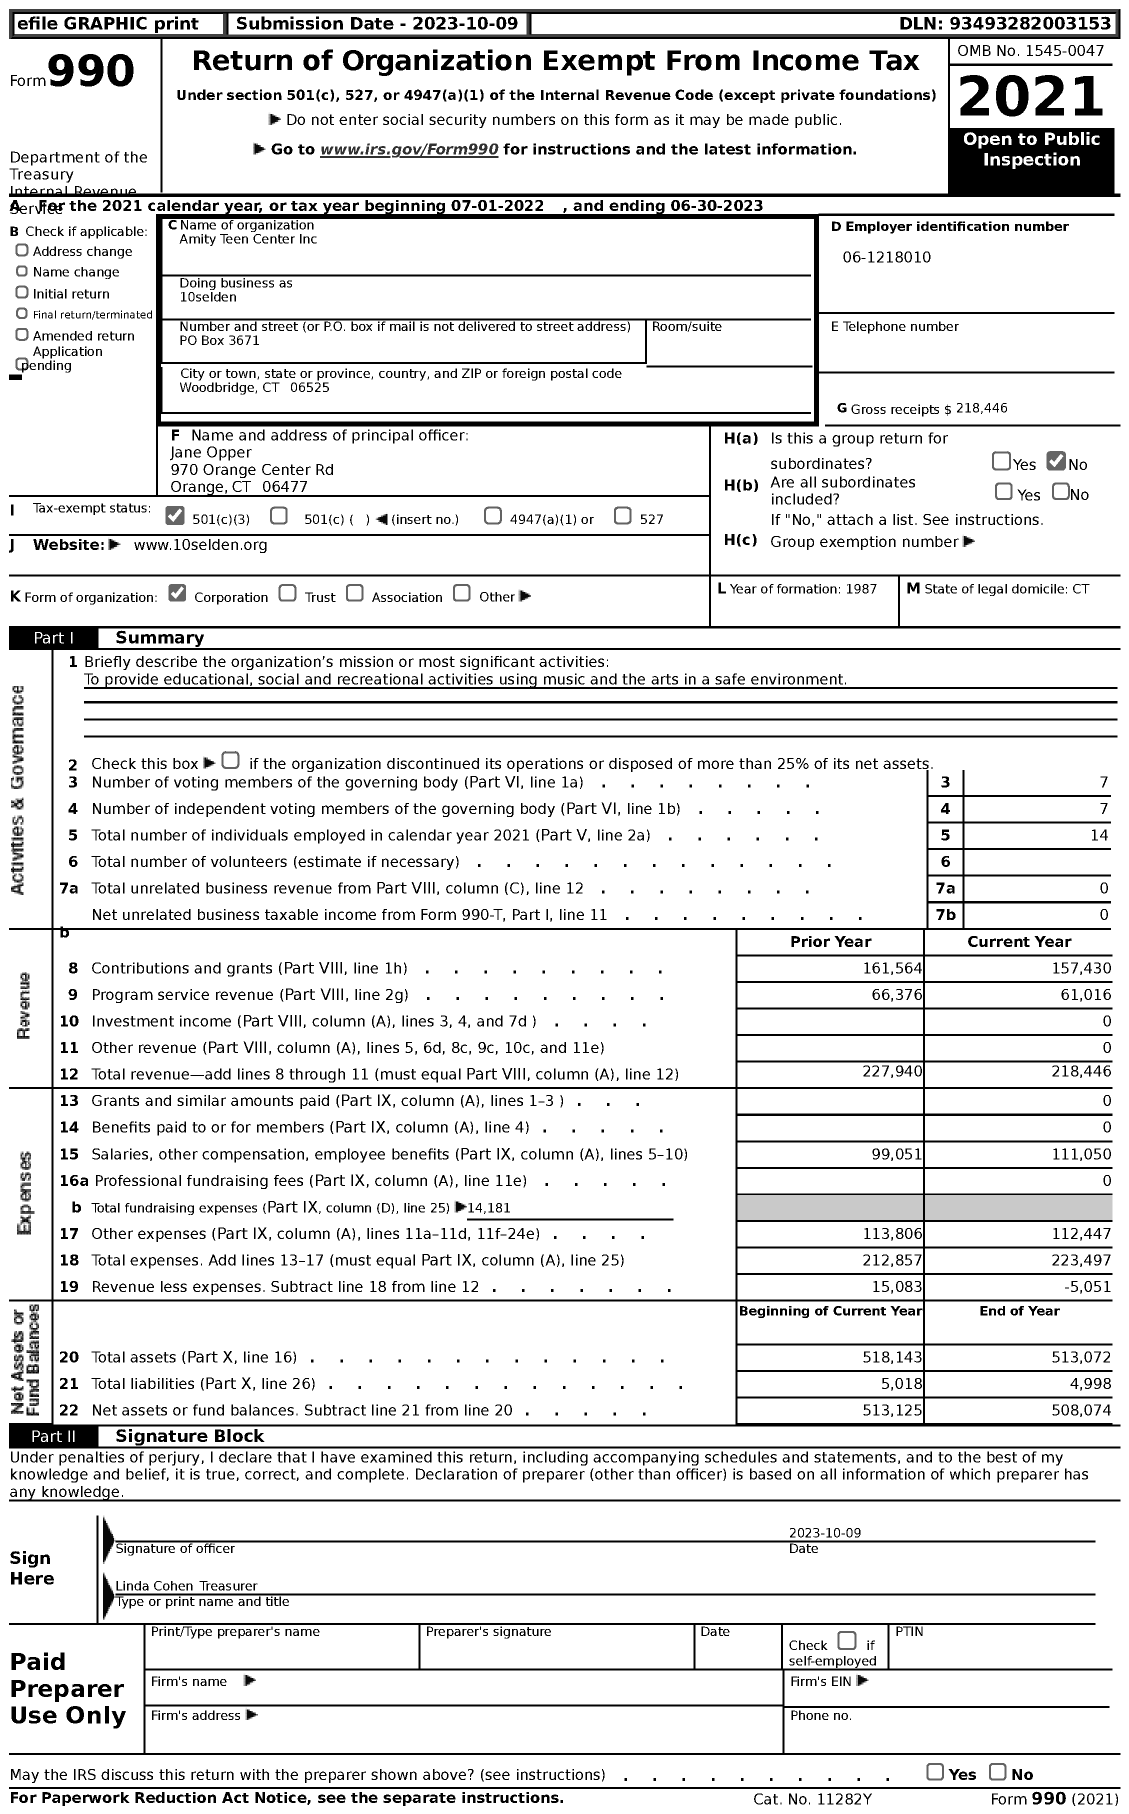 Image of first page of 2022 Form 990 for 10selden